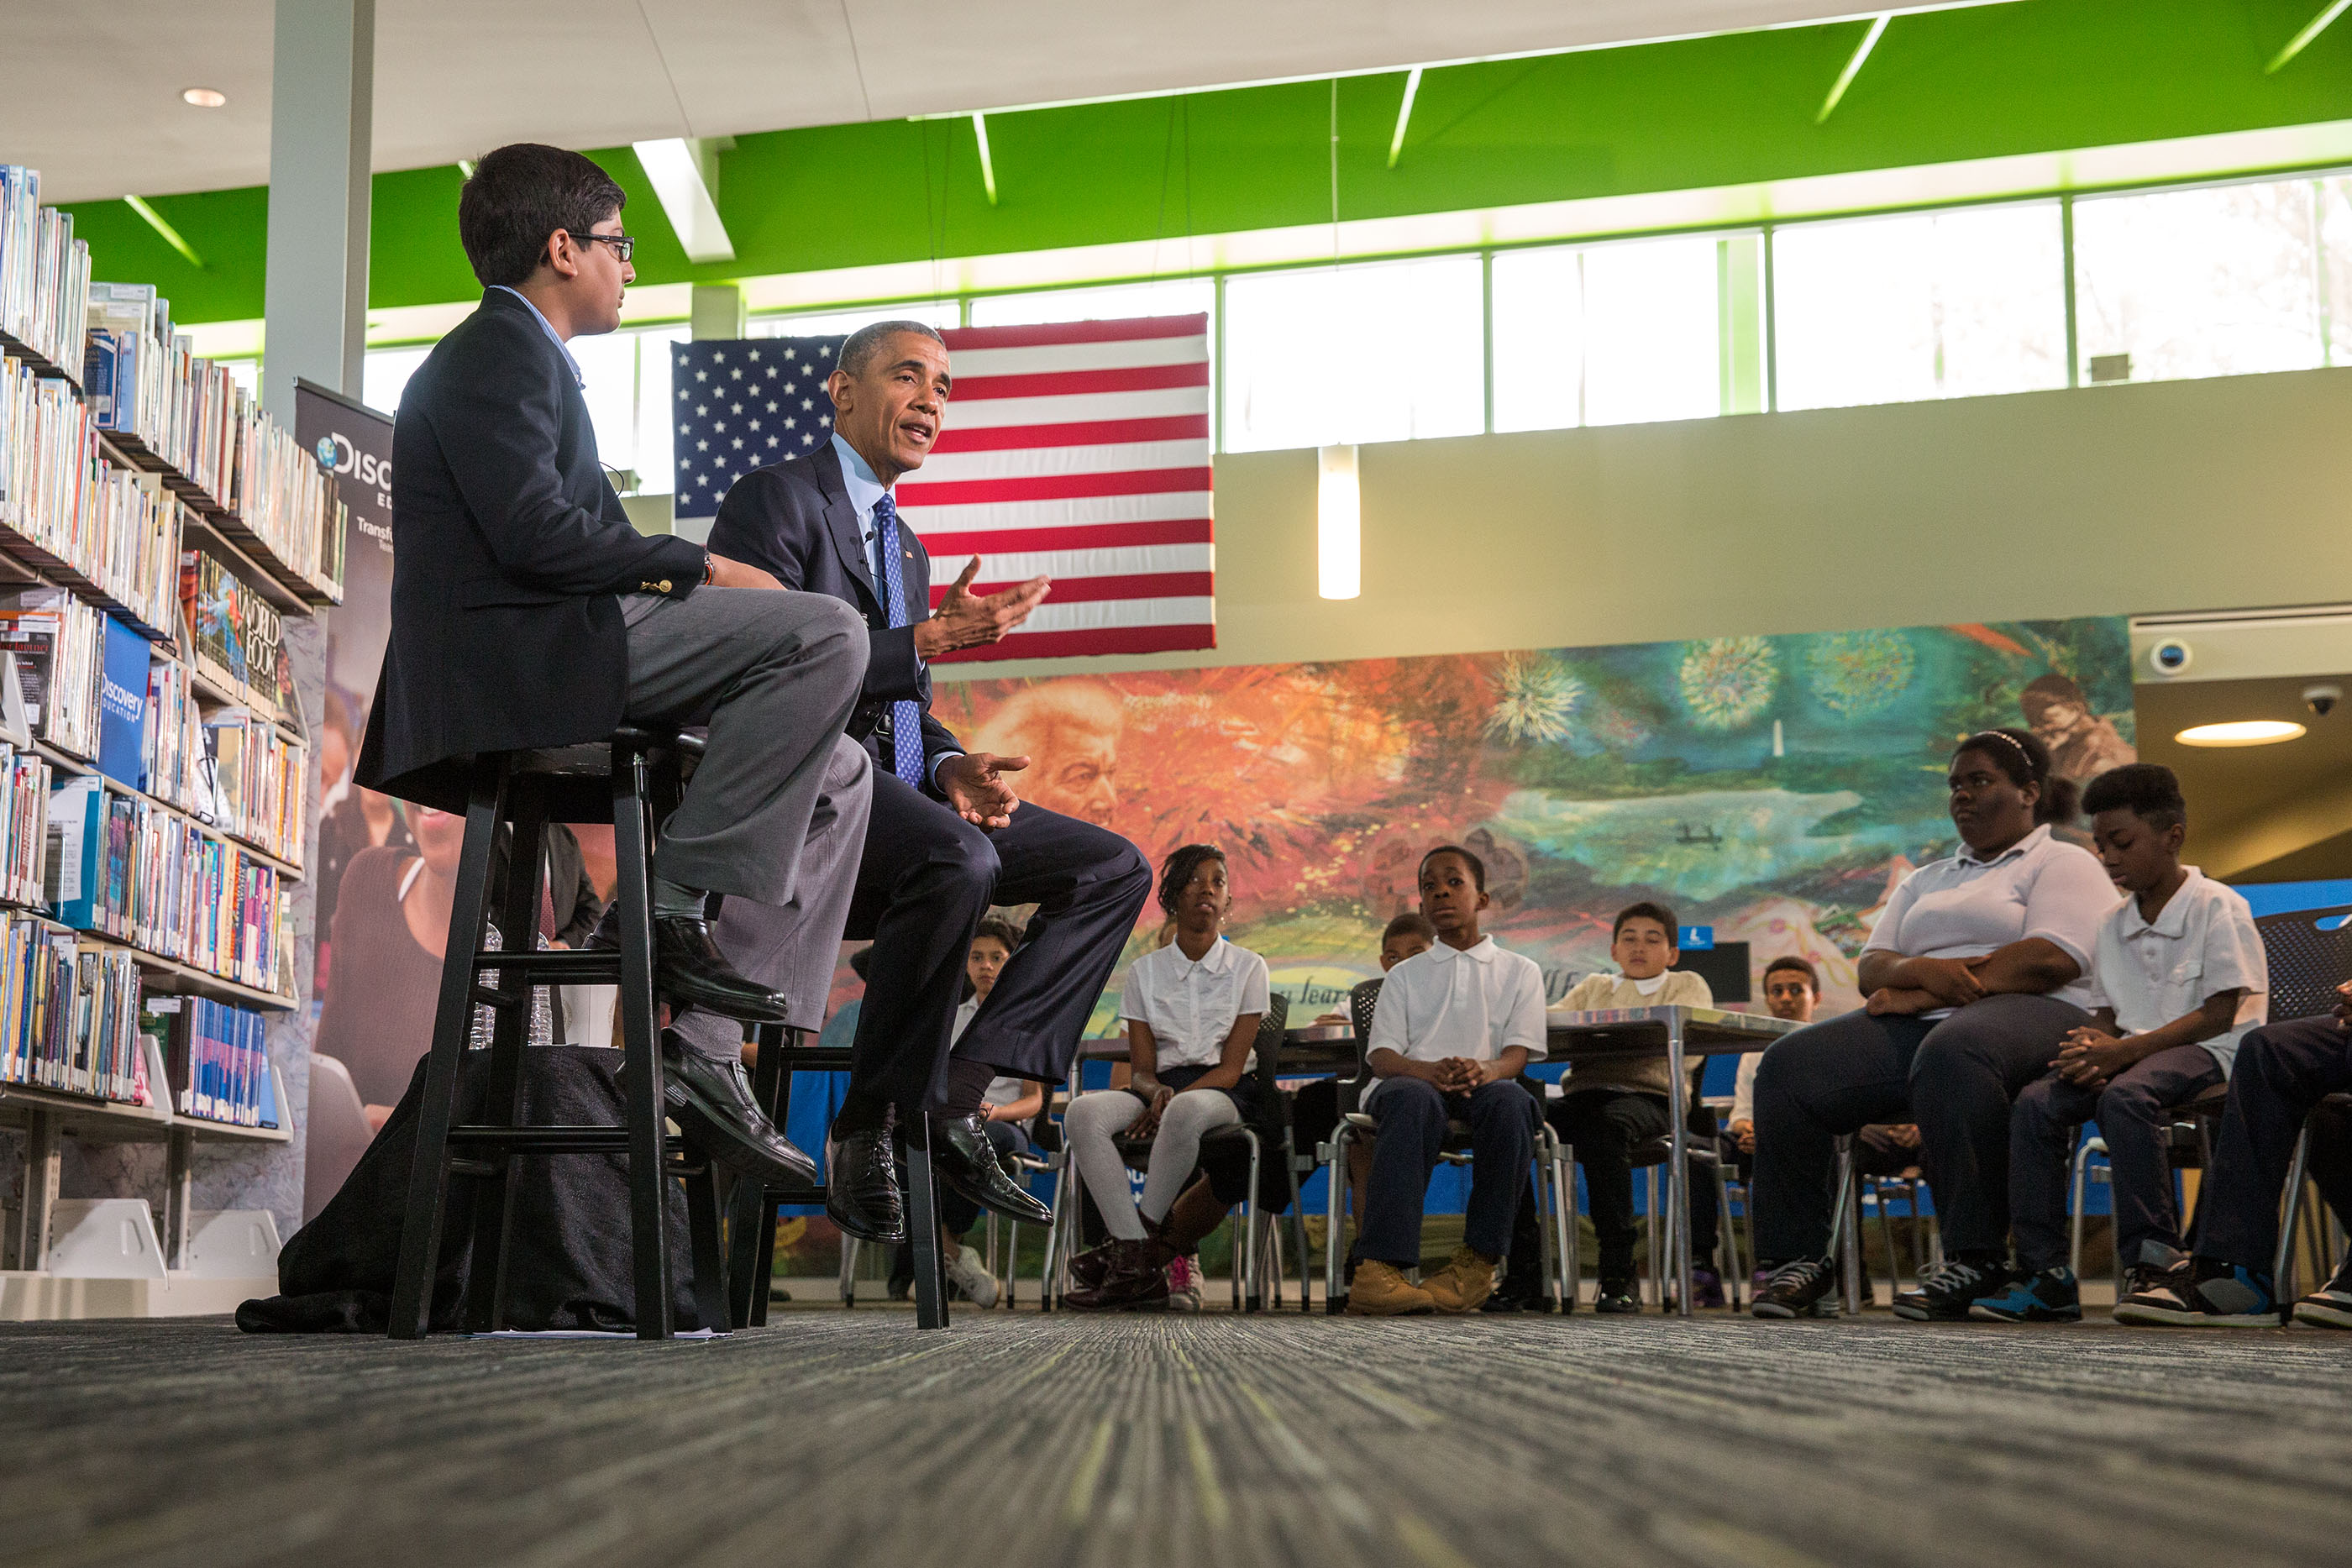 President Obama answers questions from students during a Discovery Education webinar